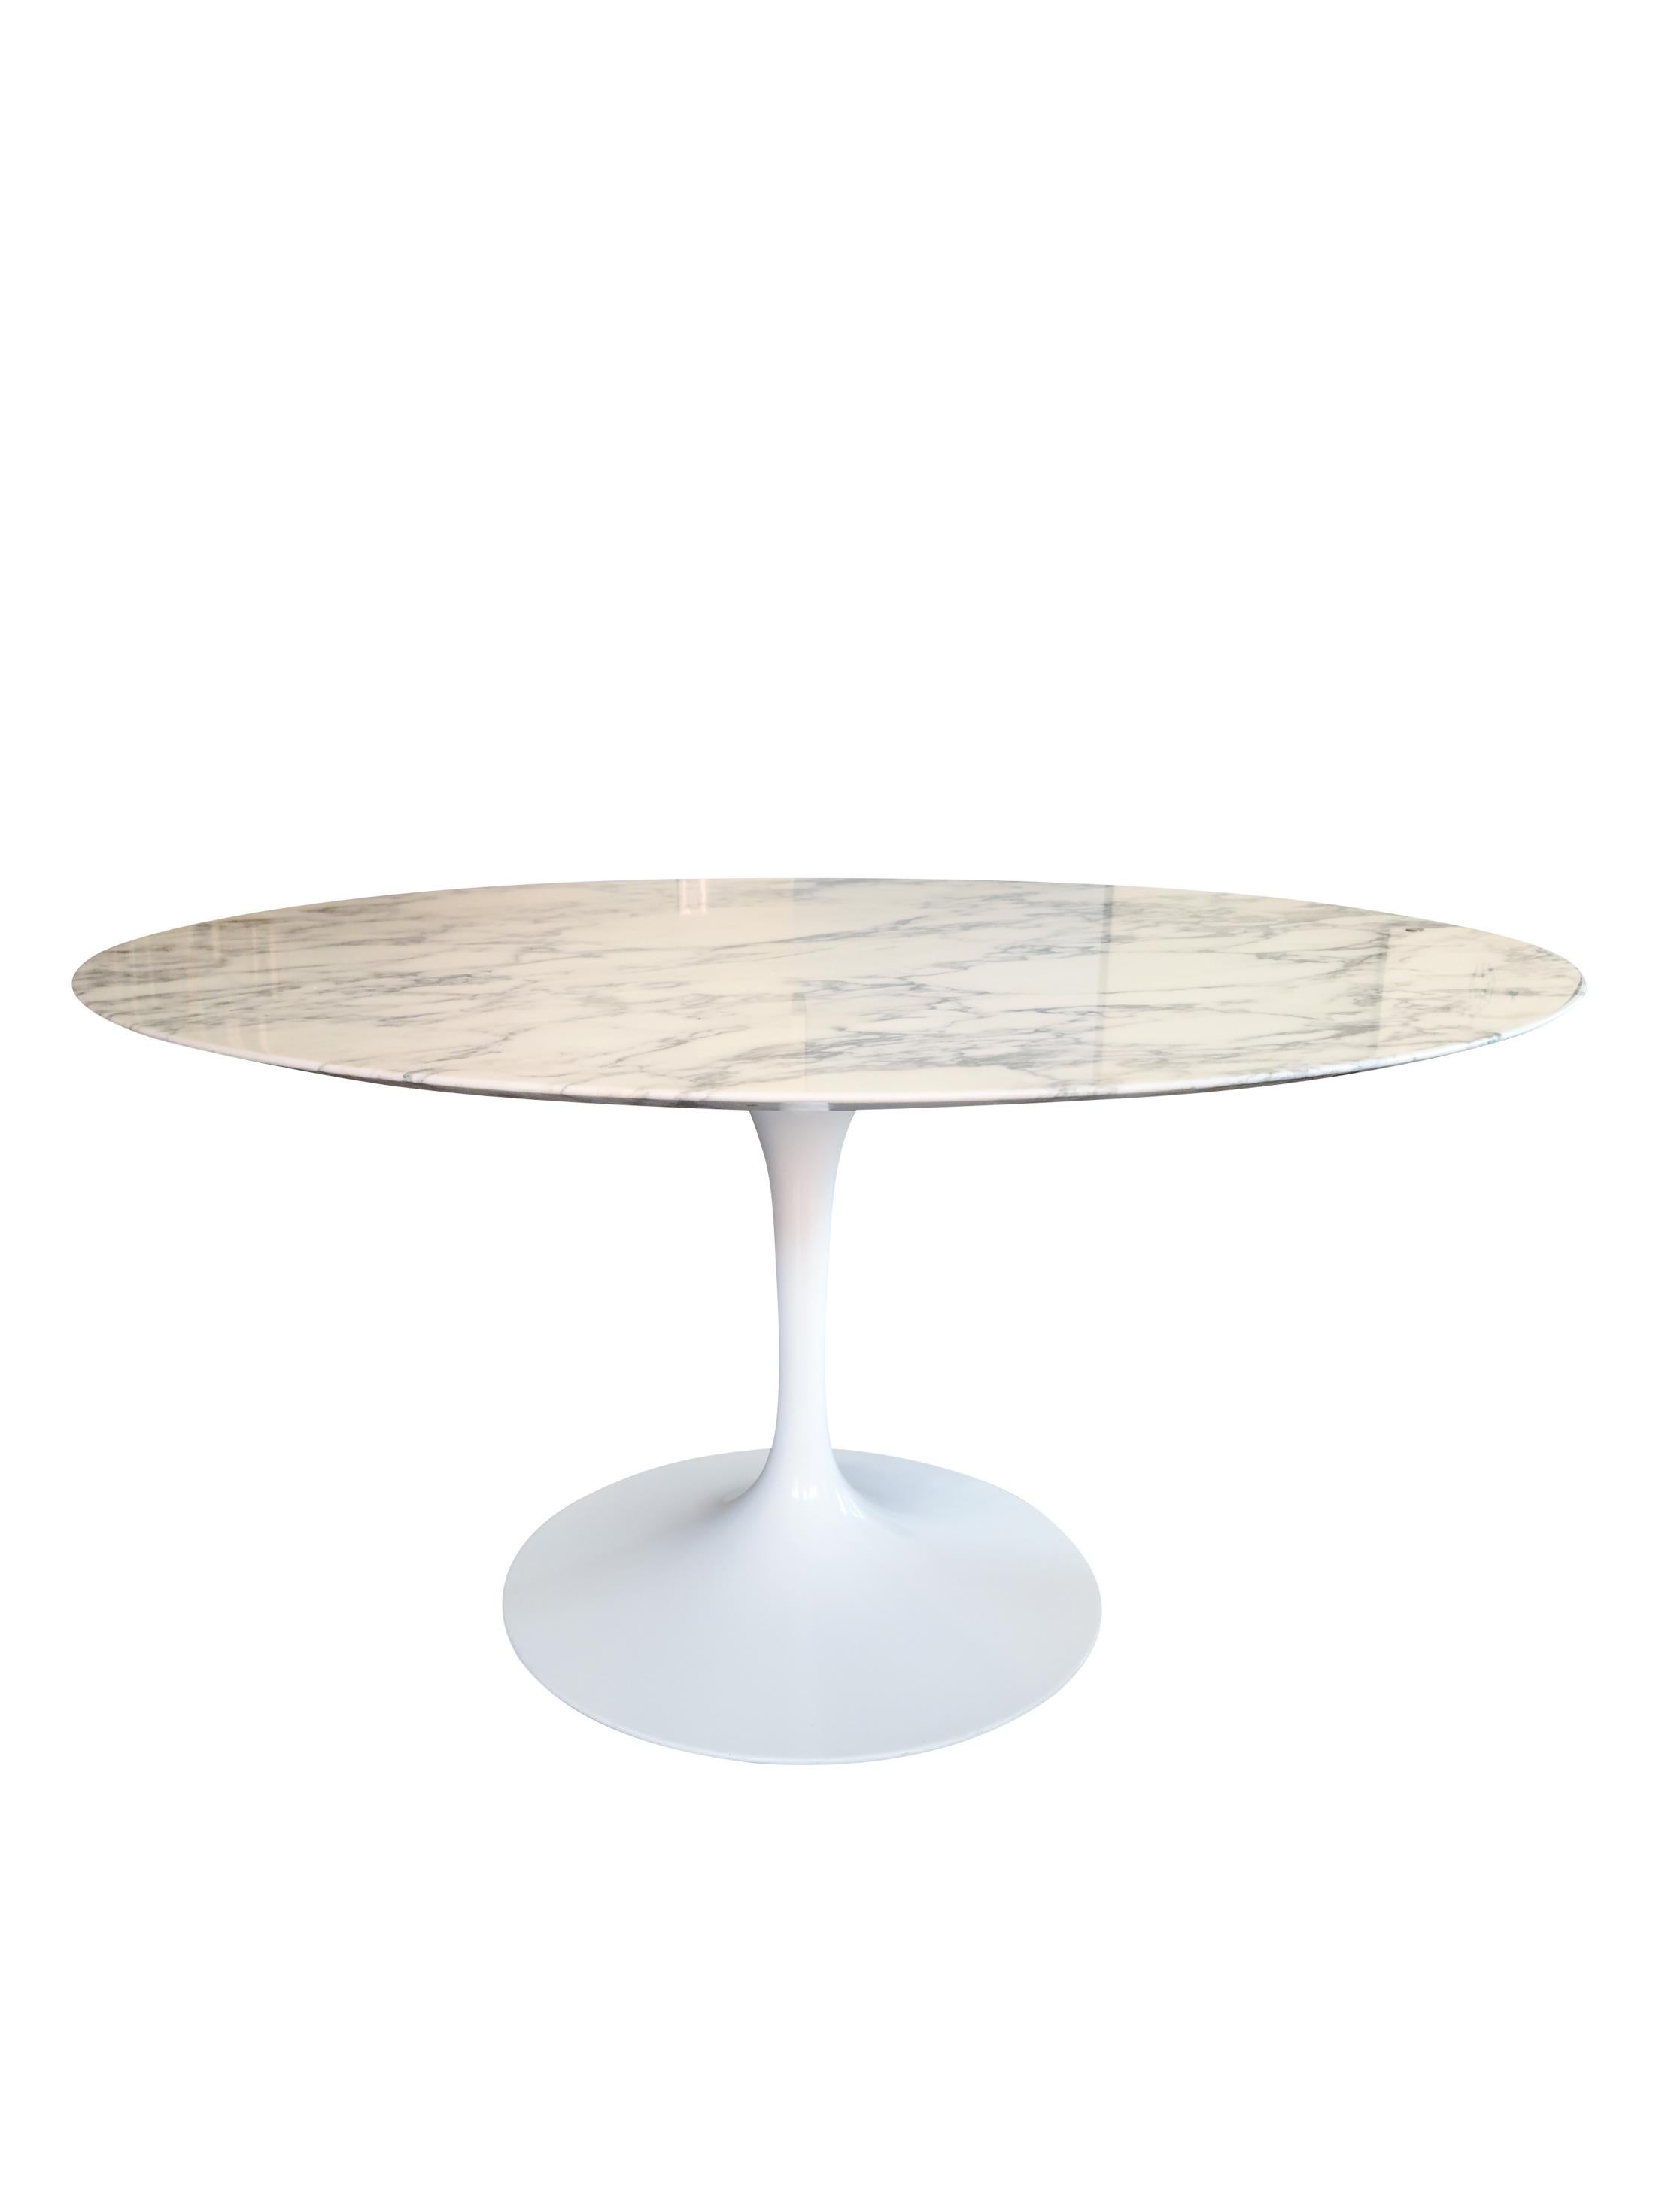 Saarinen Knoll round marble table, 2010
Eero Saarinen (1910-1961) and Knoll International
Tulip, model originally created, 1956.
Measures: 54 inches diameter, 29 inches high.
Beautiful marble grain in black and white.